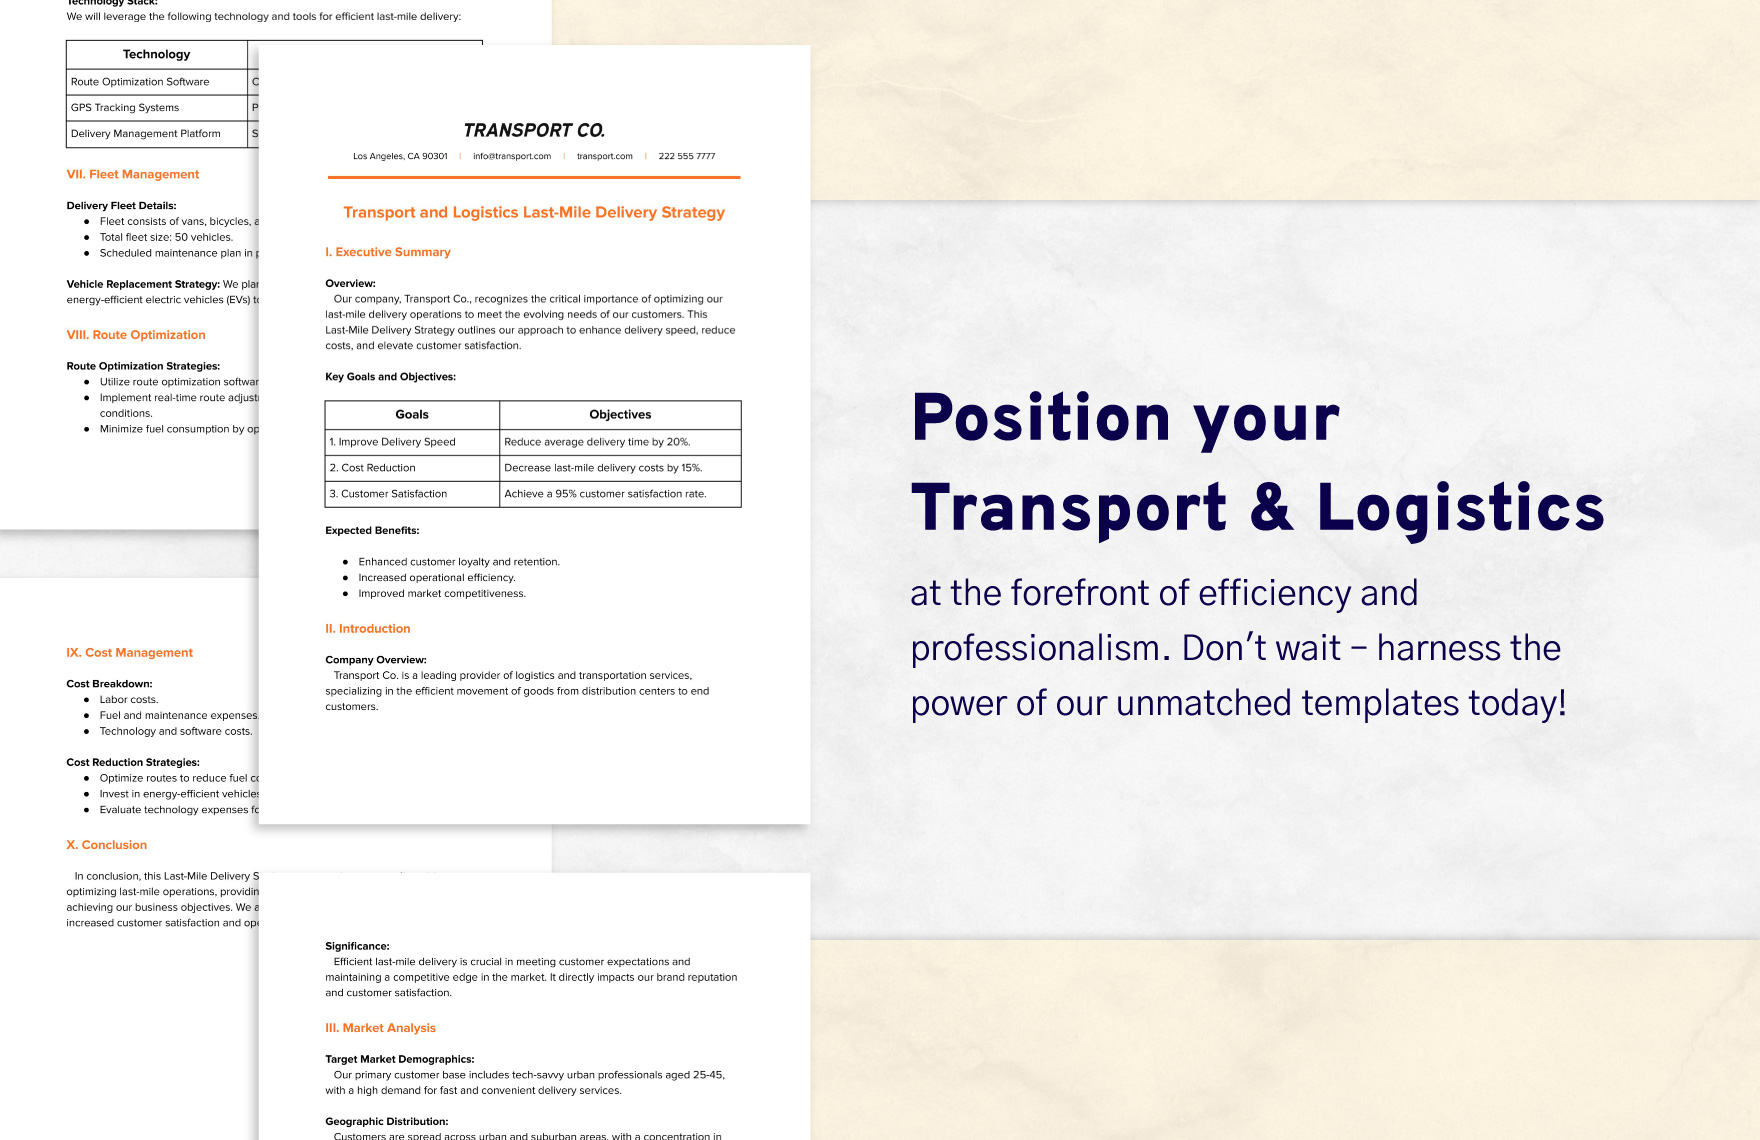 Transport and Logistics Last-Mile Delivery Strategy Template